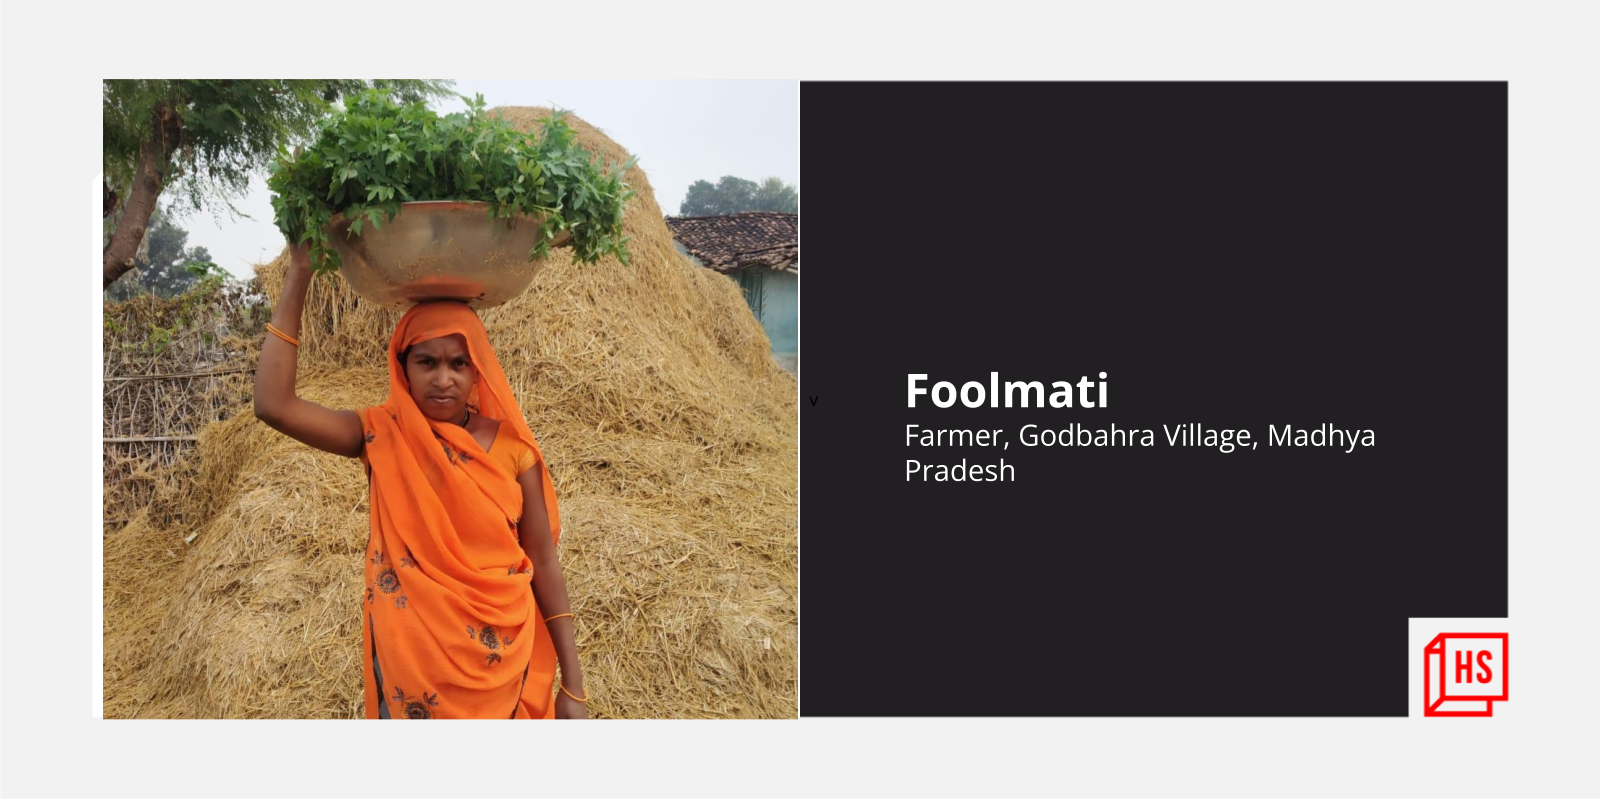 [Women’s Day] Meet Foolmati, a farmer from Madhya Pradesh helping others increase productivity and income
